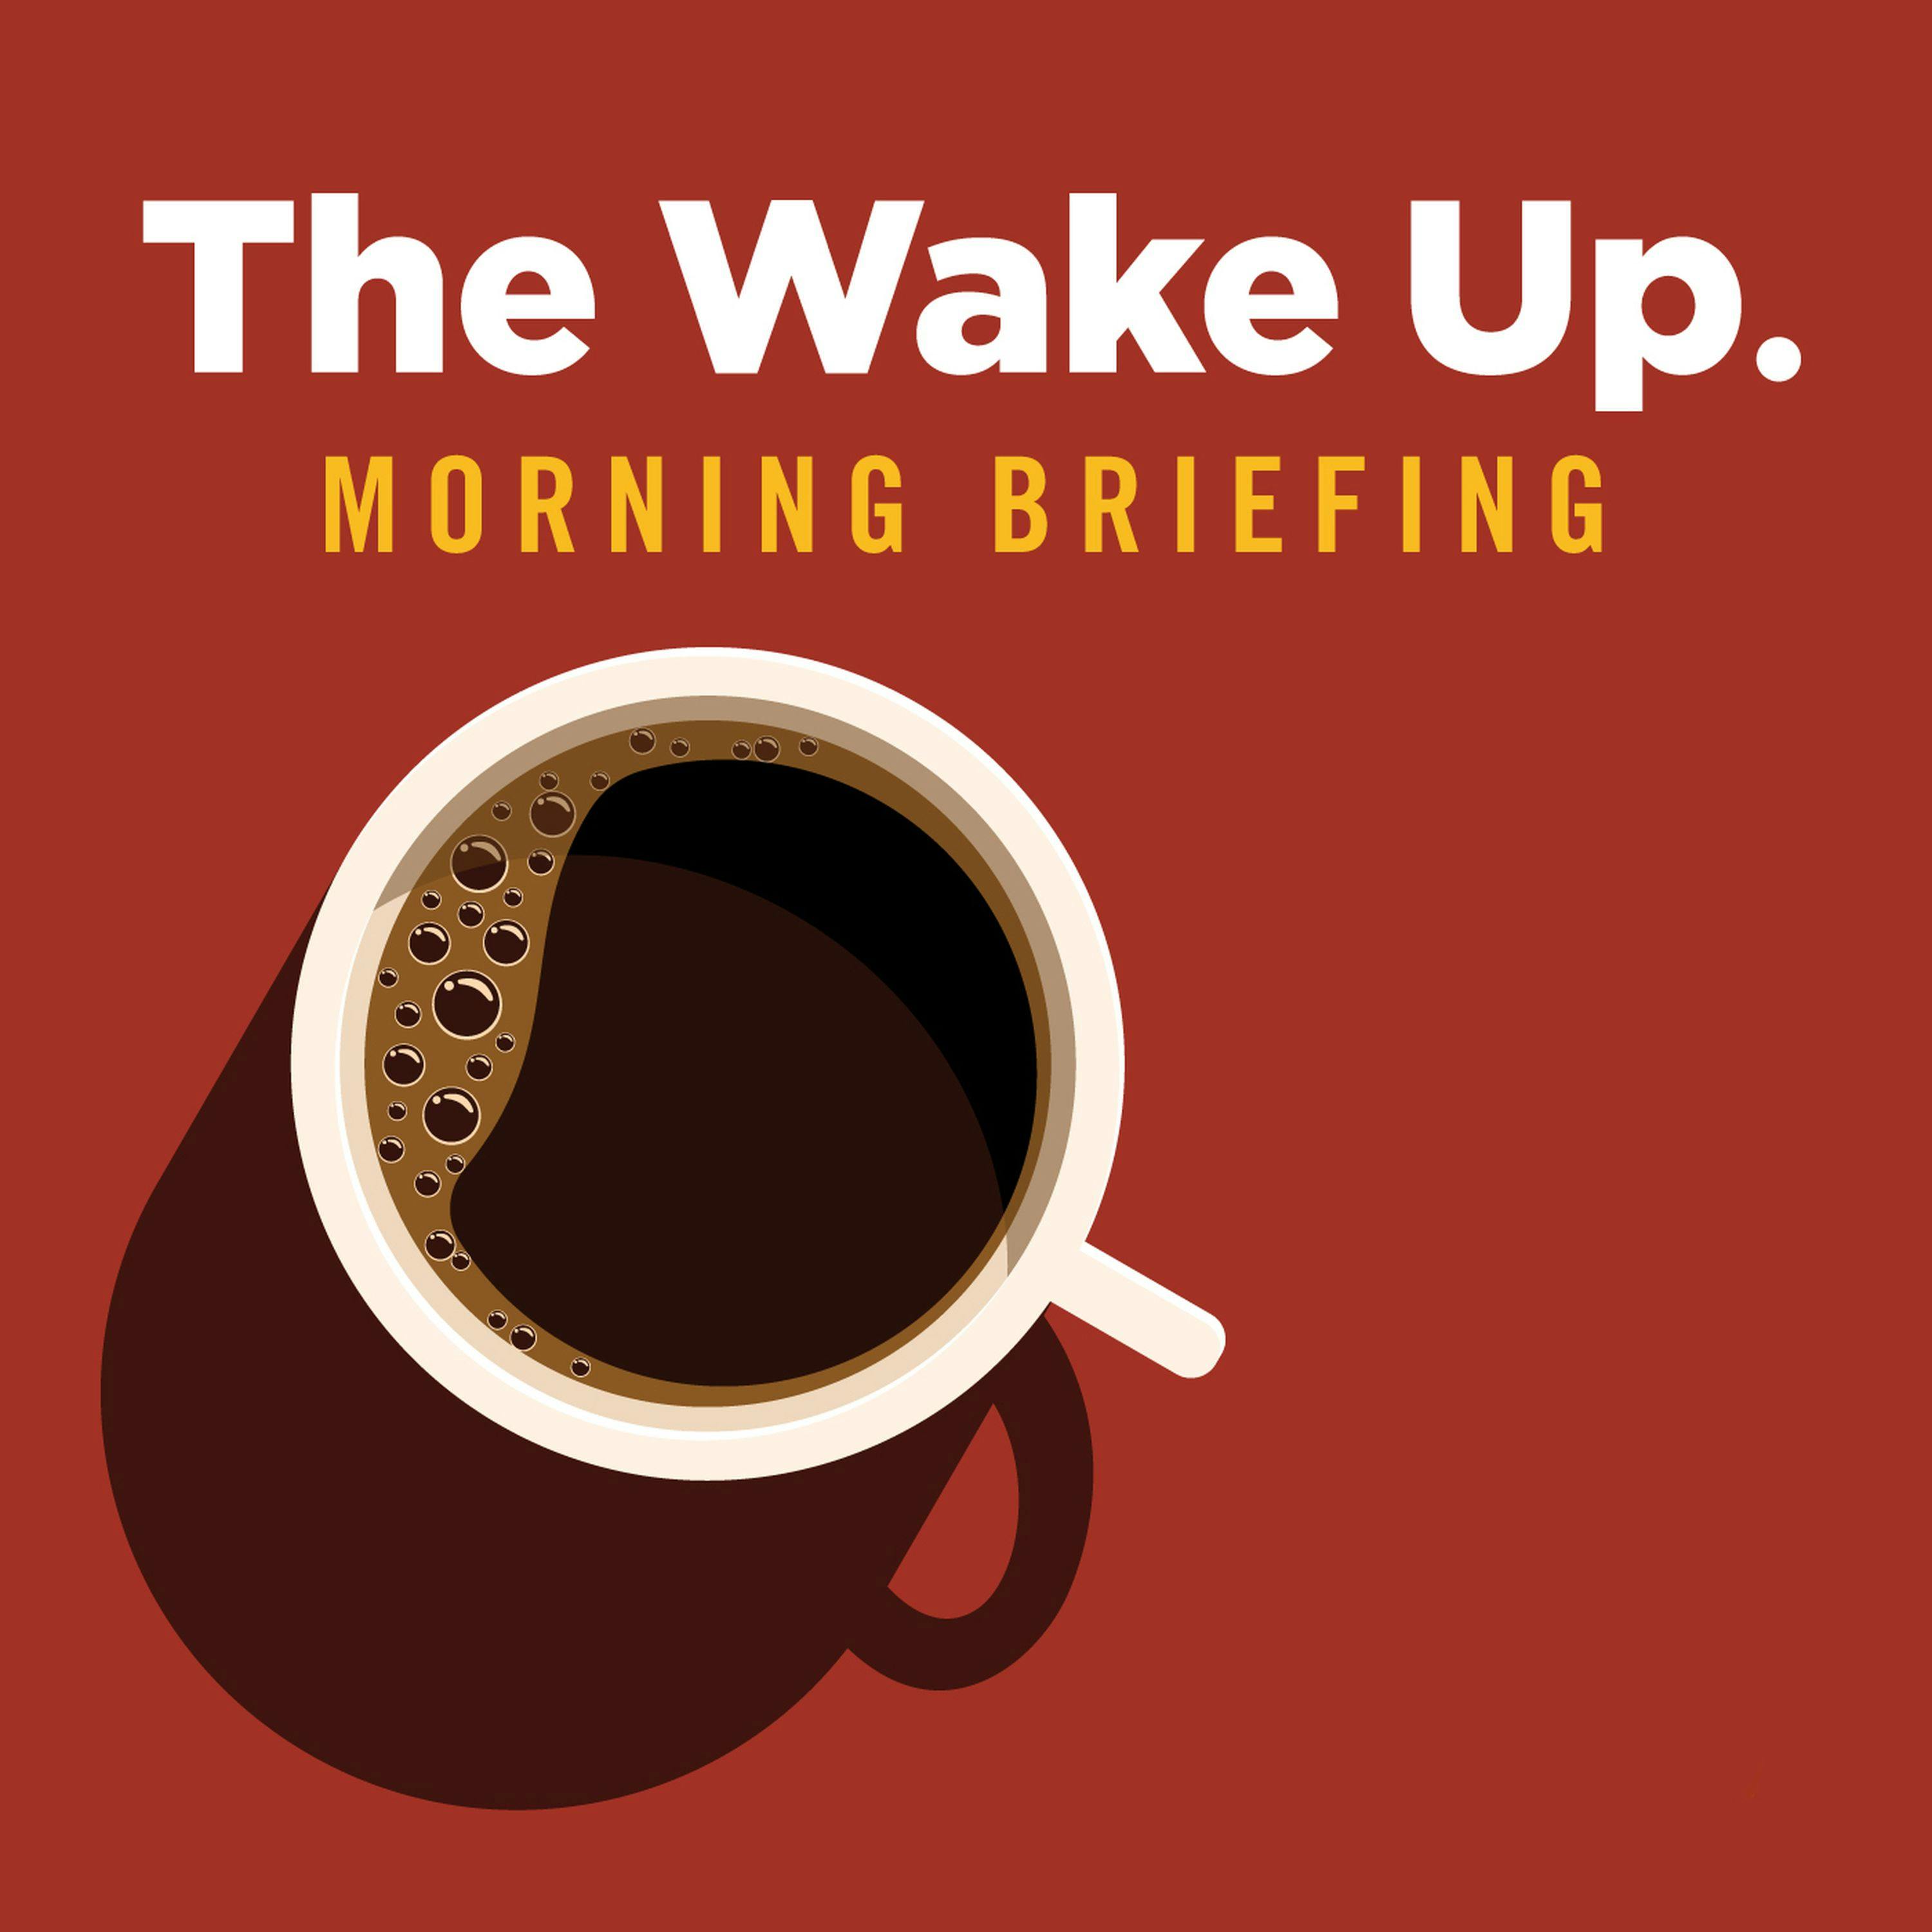 The Wake Up - August 13, 2020 - Why is Ohio Secretary of State Frank LaRose making it harder to vote?